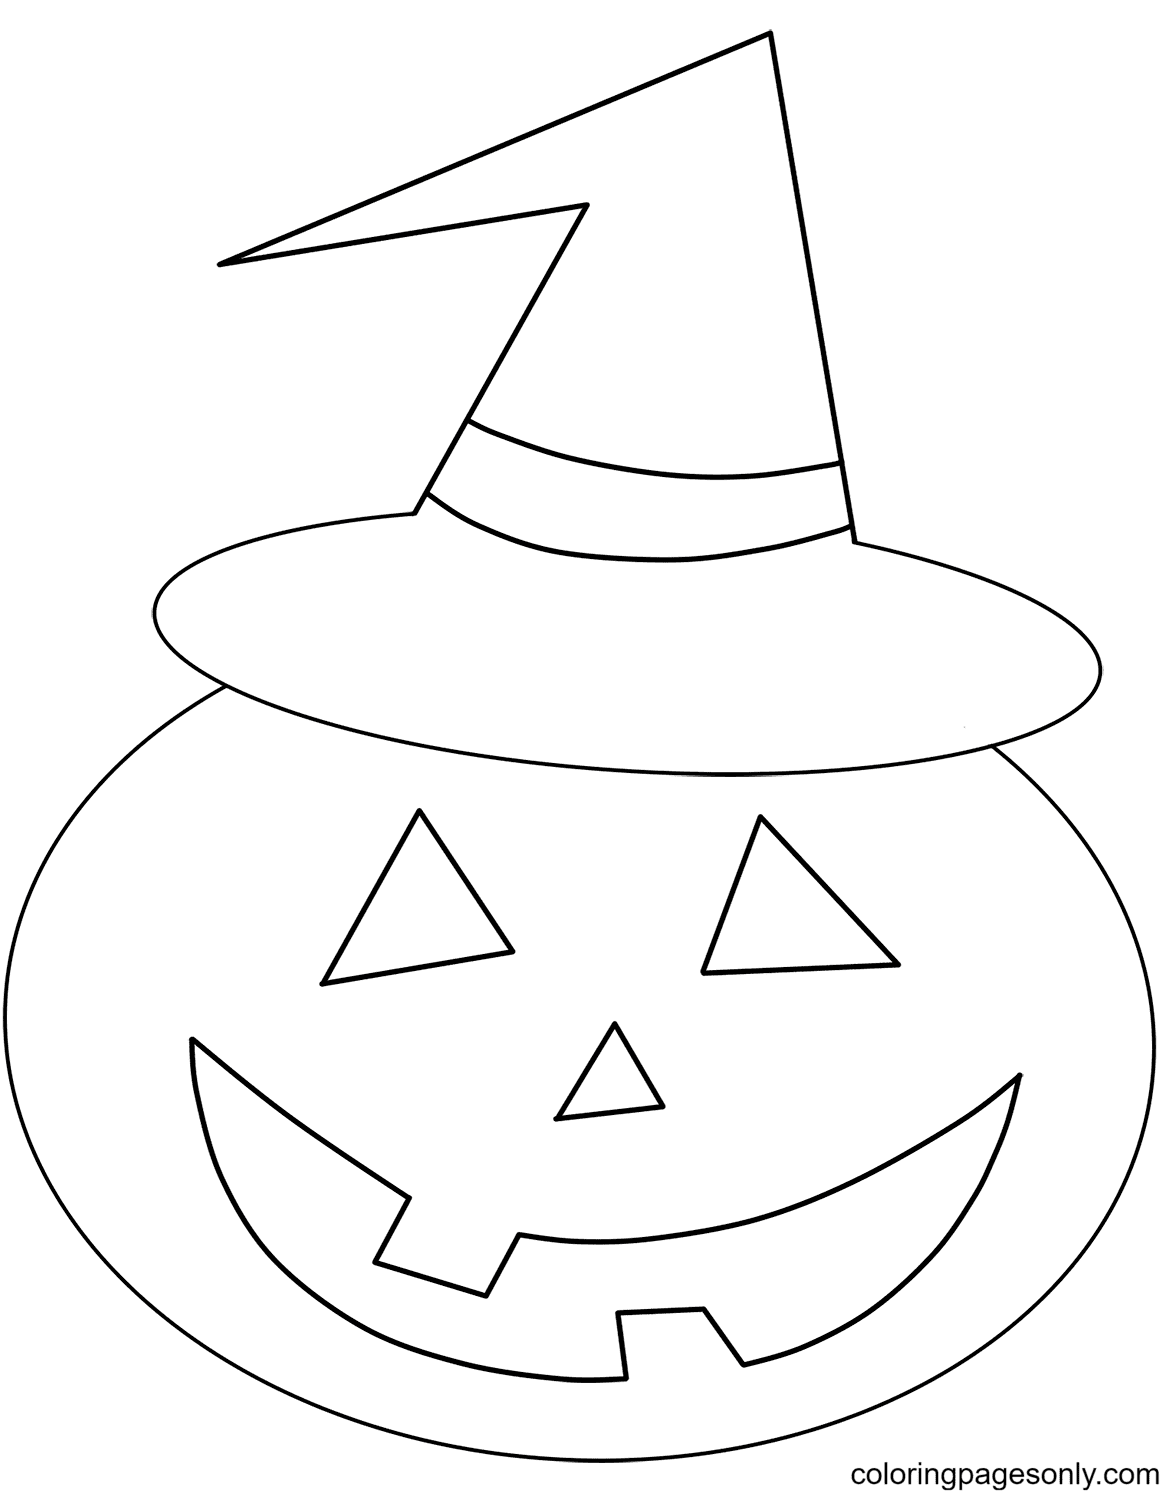 Smiling Pumpkin With Jack O' Lantern Coloring Pages